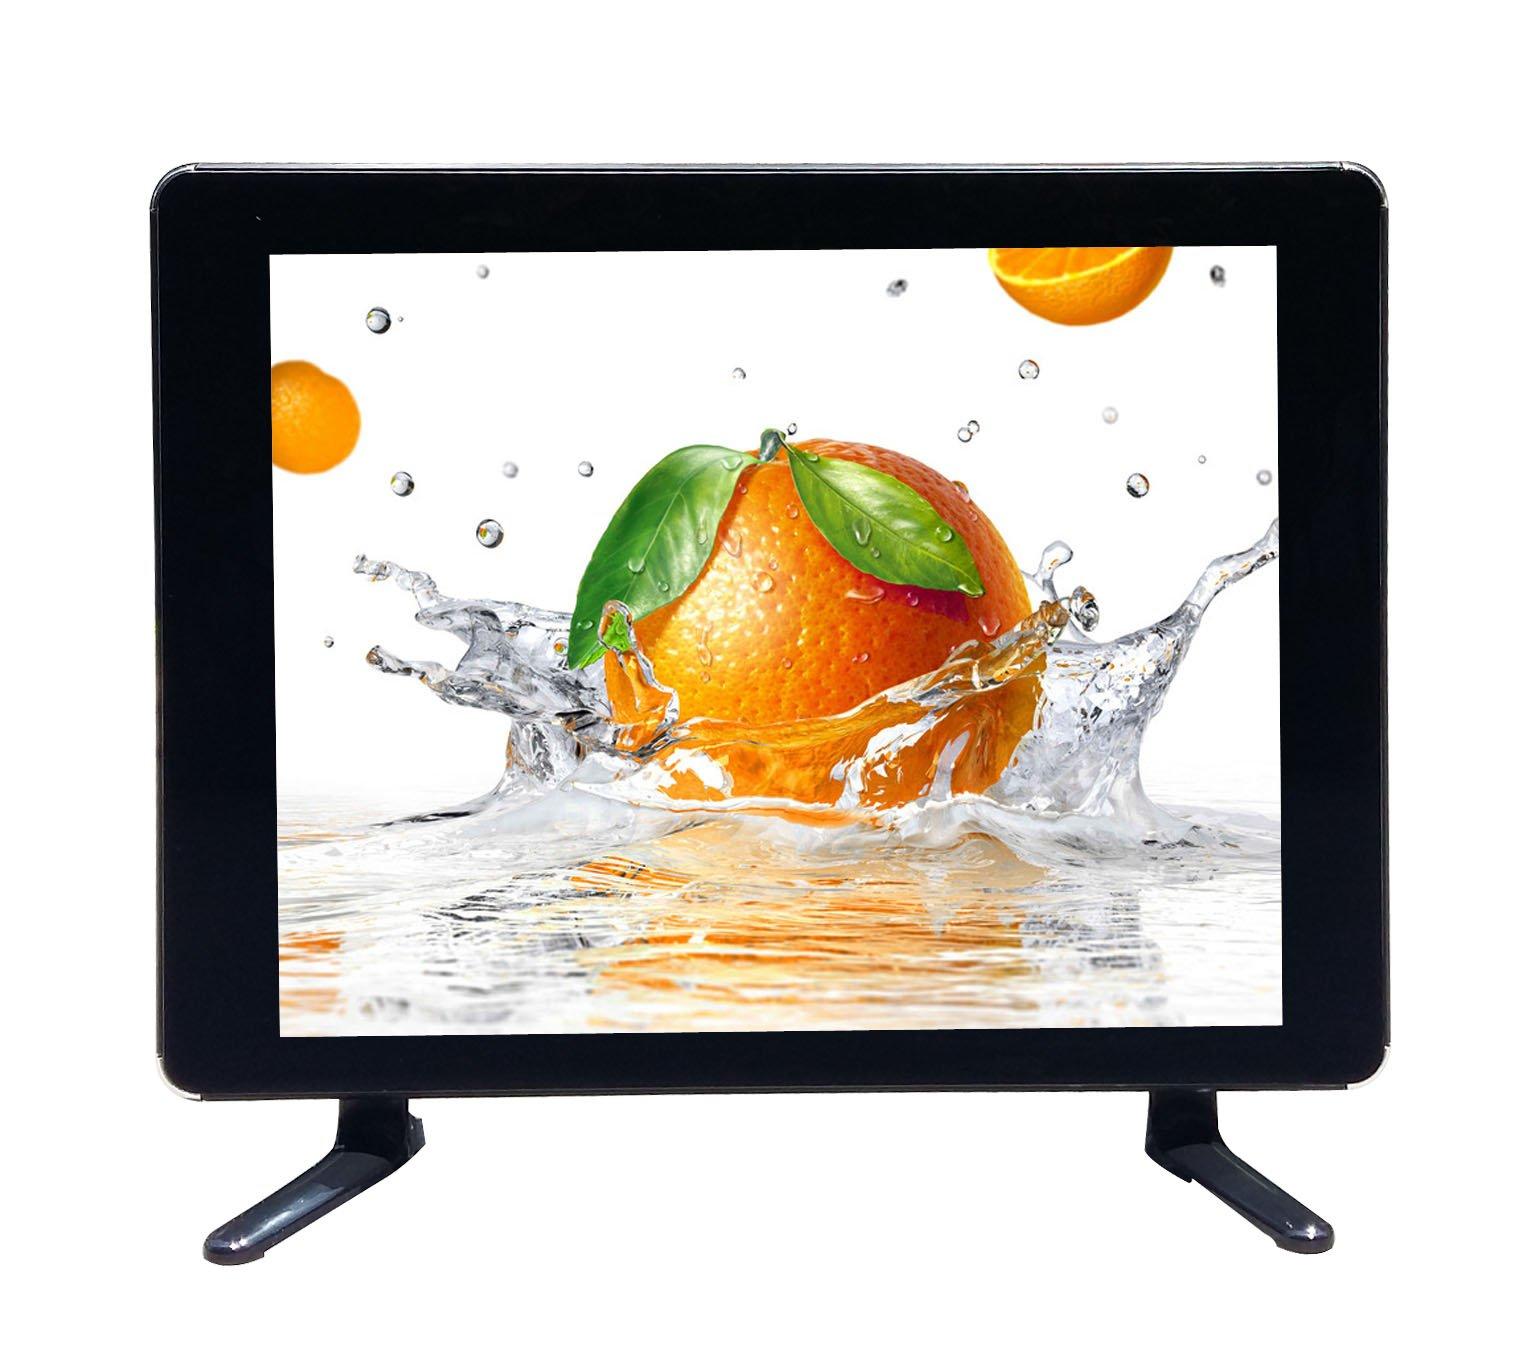 17 inch tv price new style for lcd screen